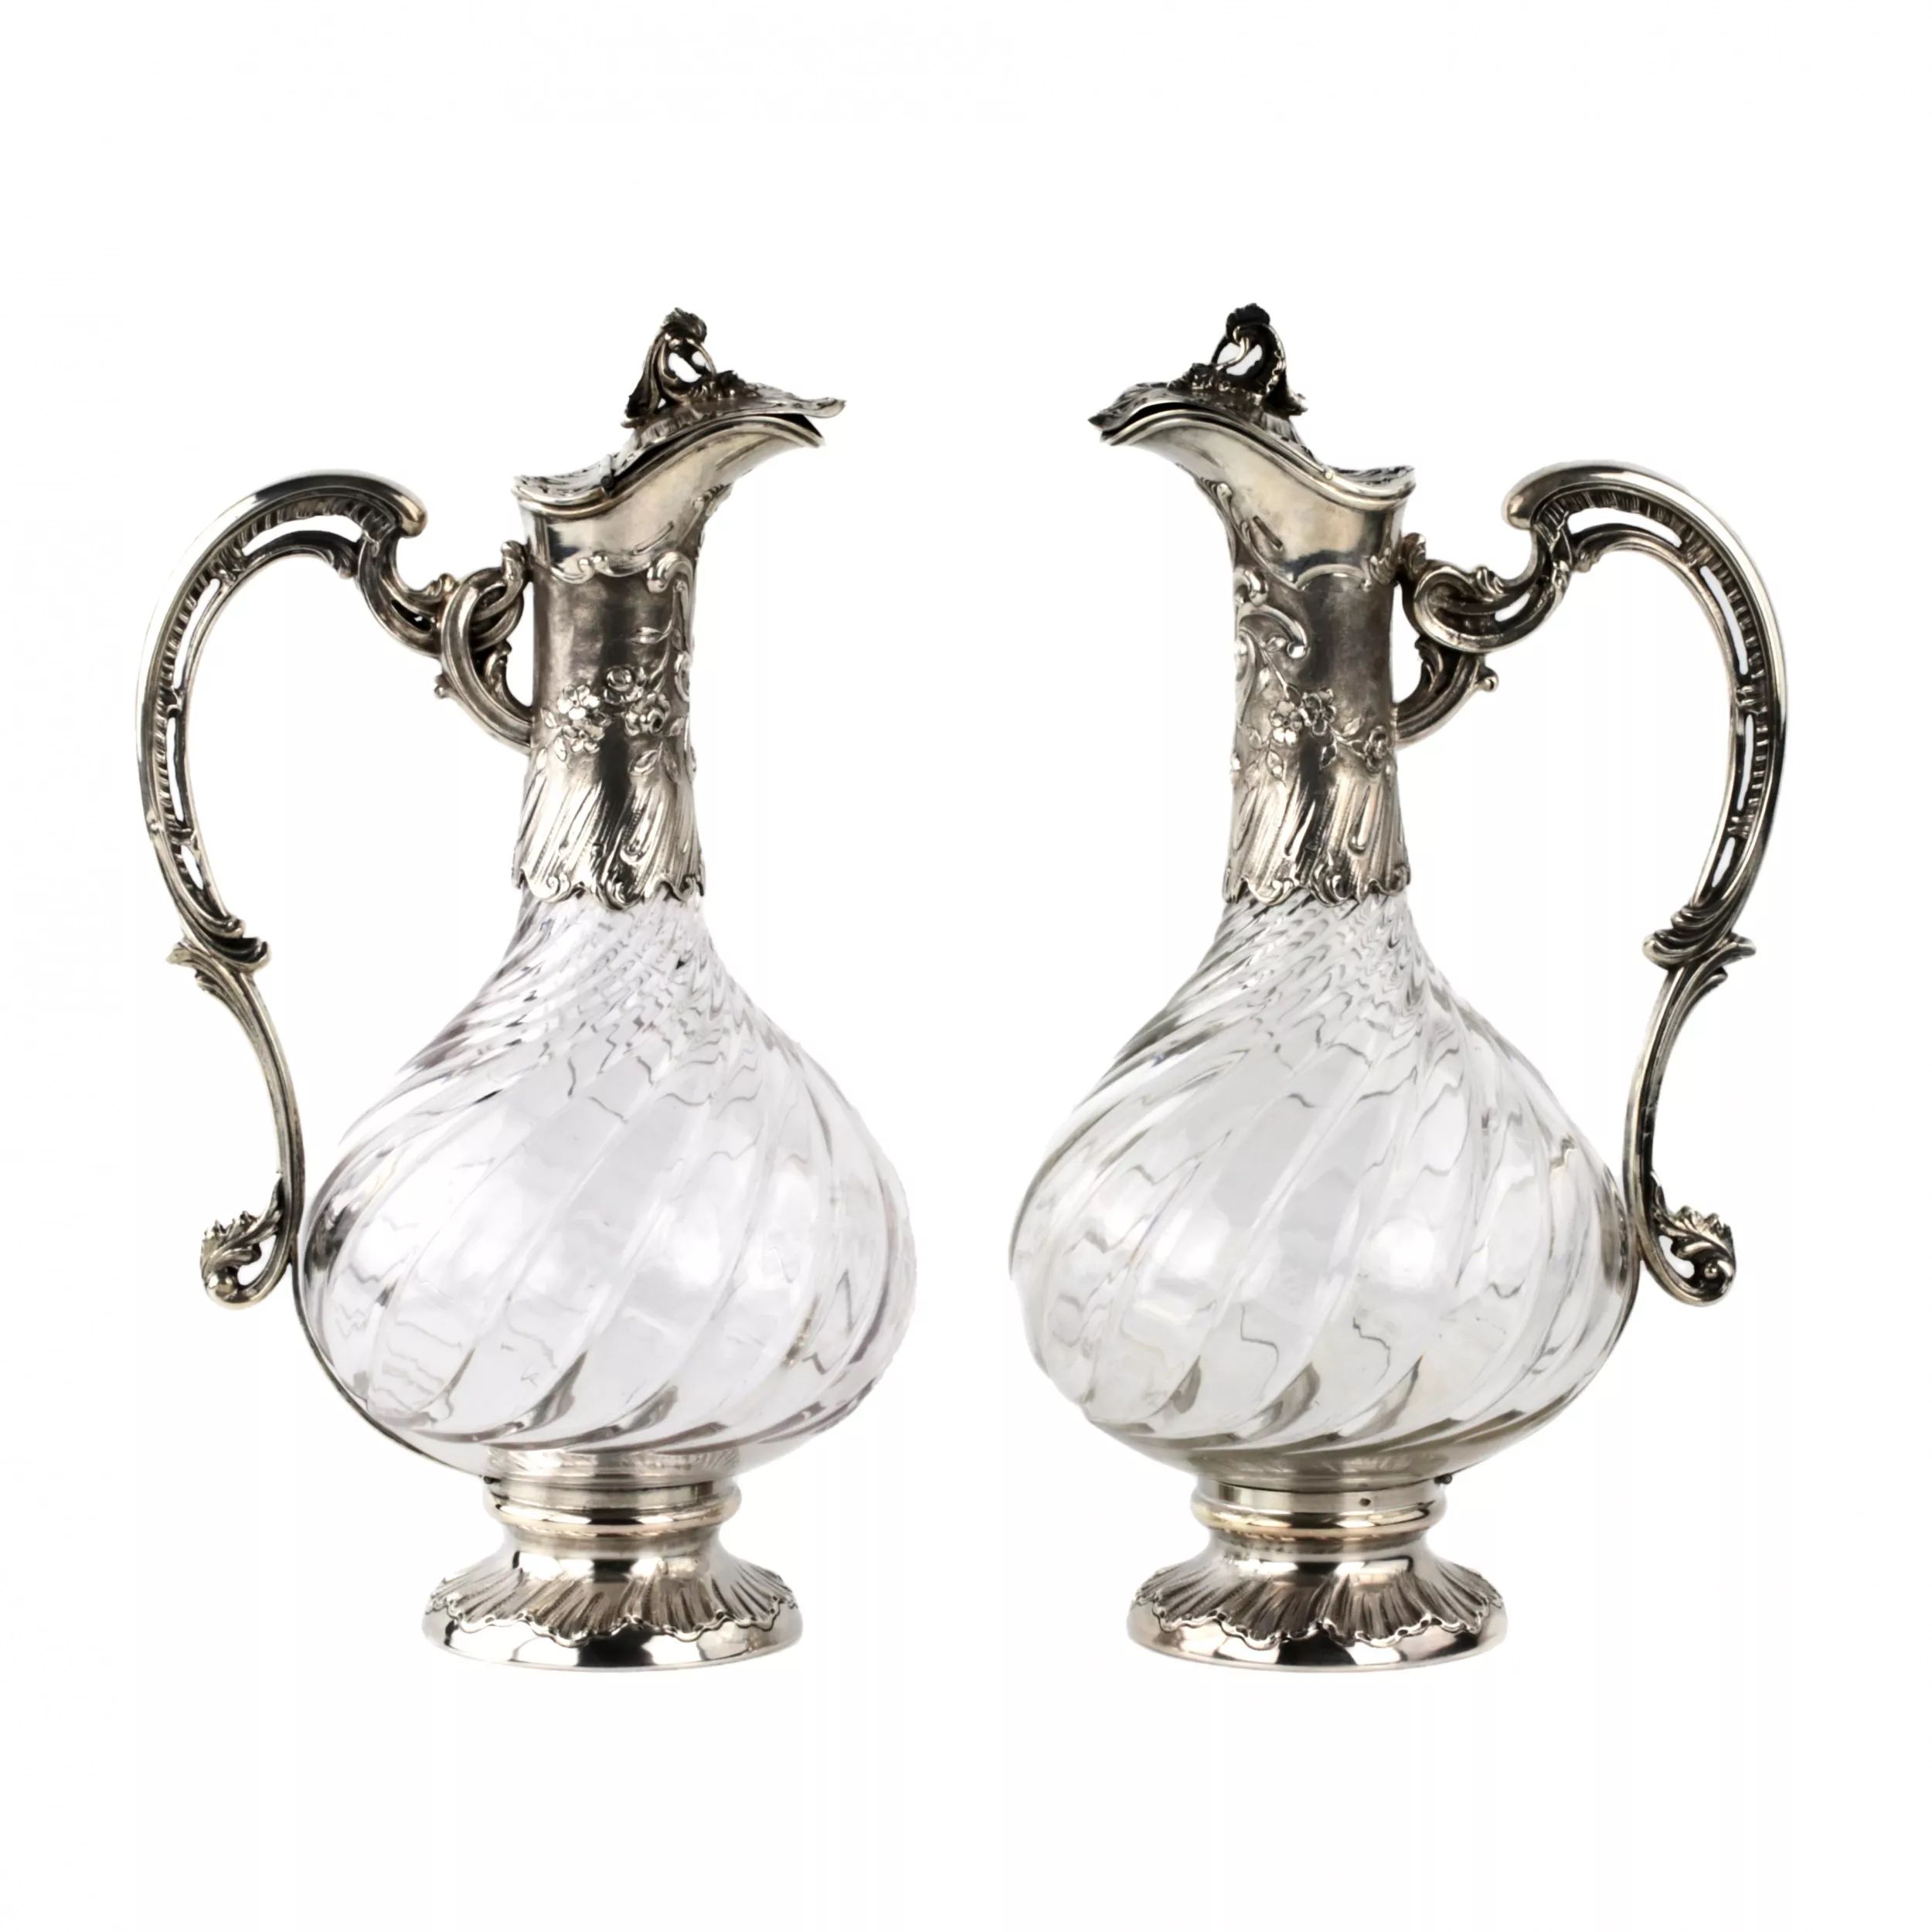 A-pair-of-silver-wine-jugs-from-the-late-19th-century-